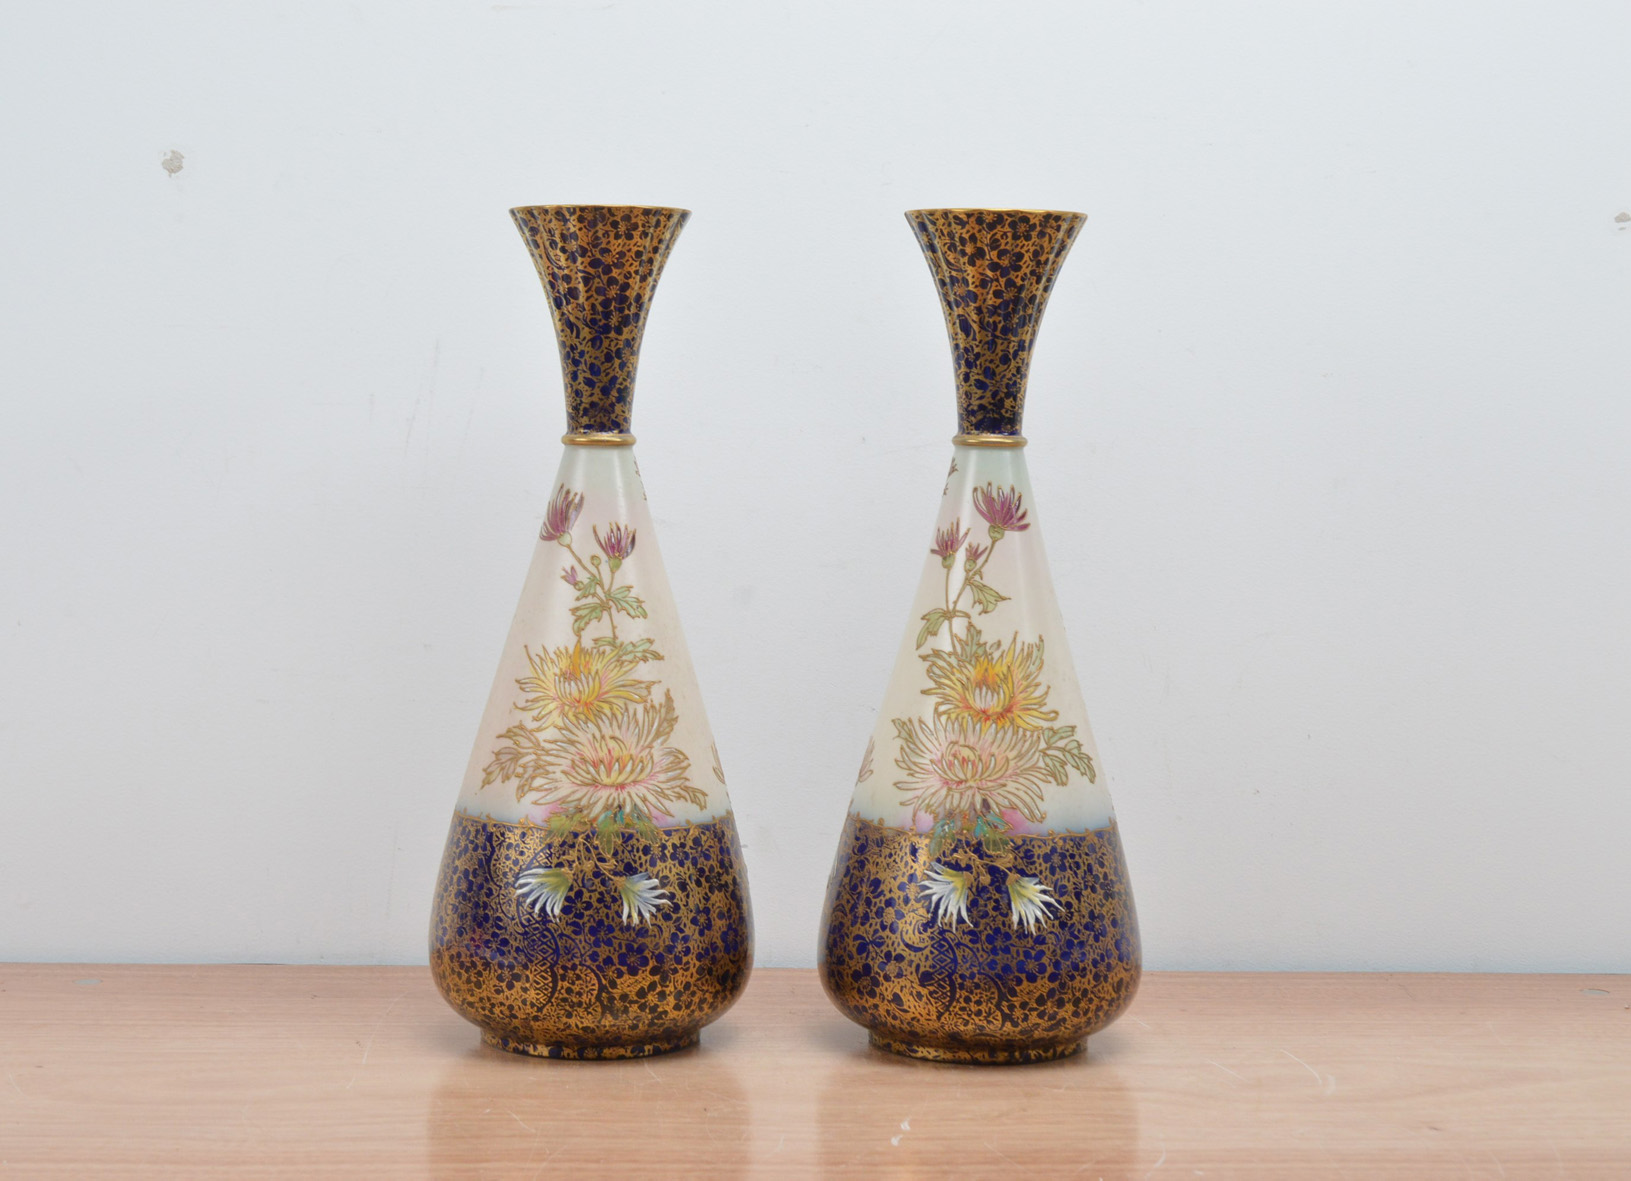 A pair of 20th century ceramic Carlton Ware vases, with floral designs, some minor condition